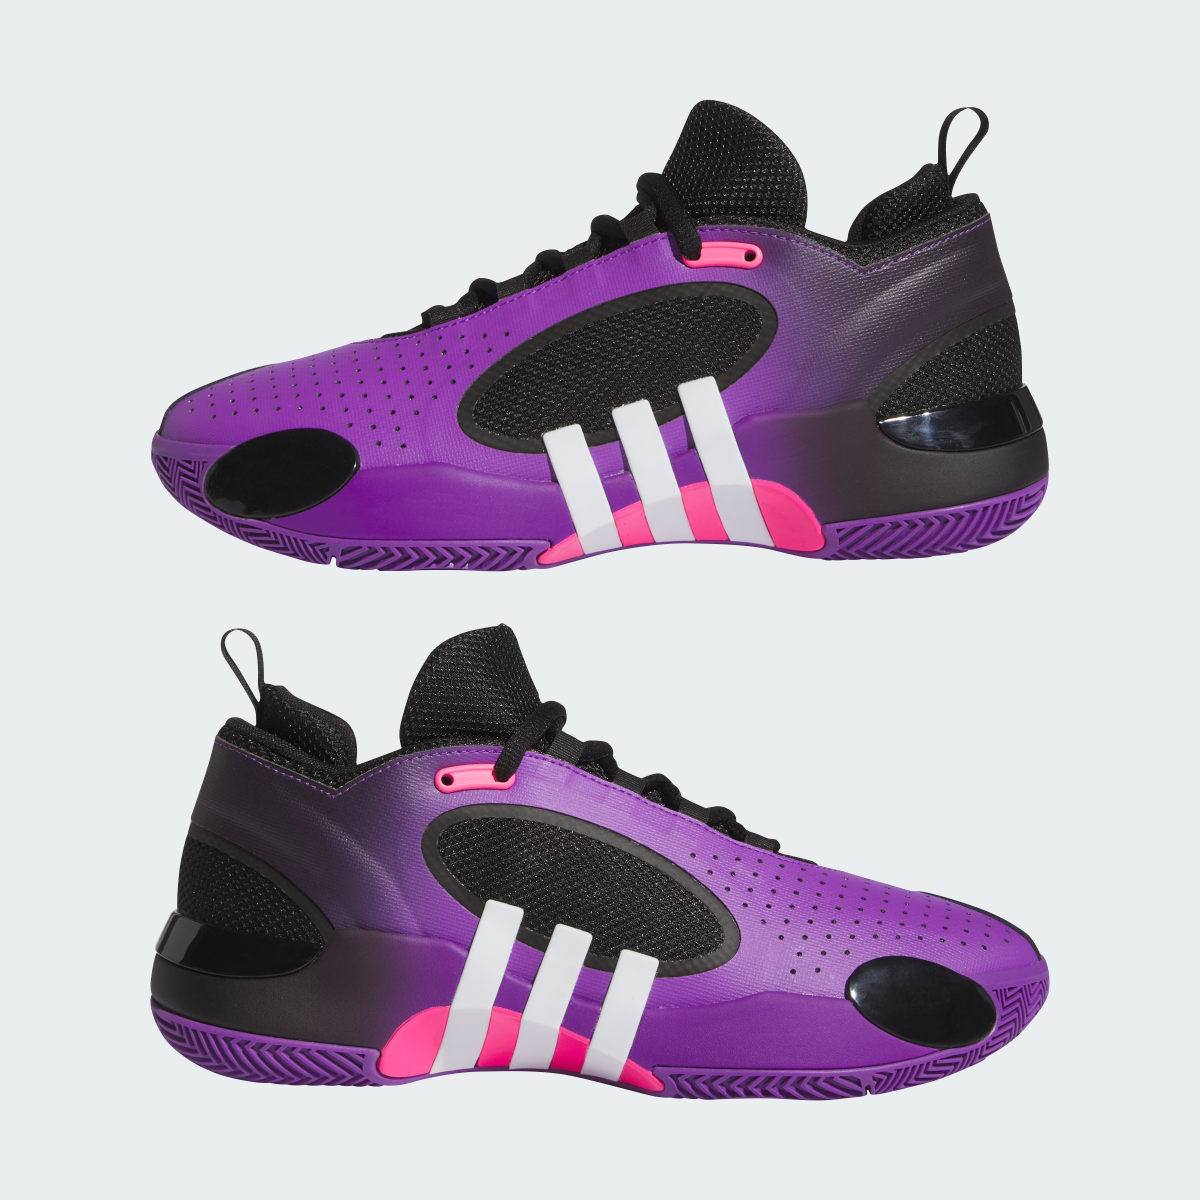 Adidas D.O.N. Issue 5 Basketball Shoes. 8